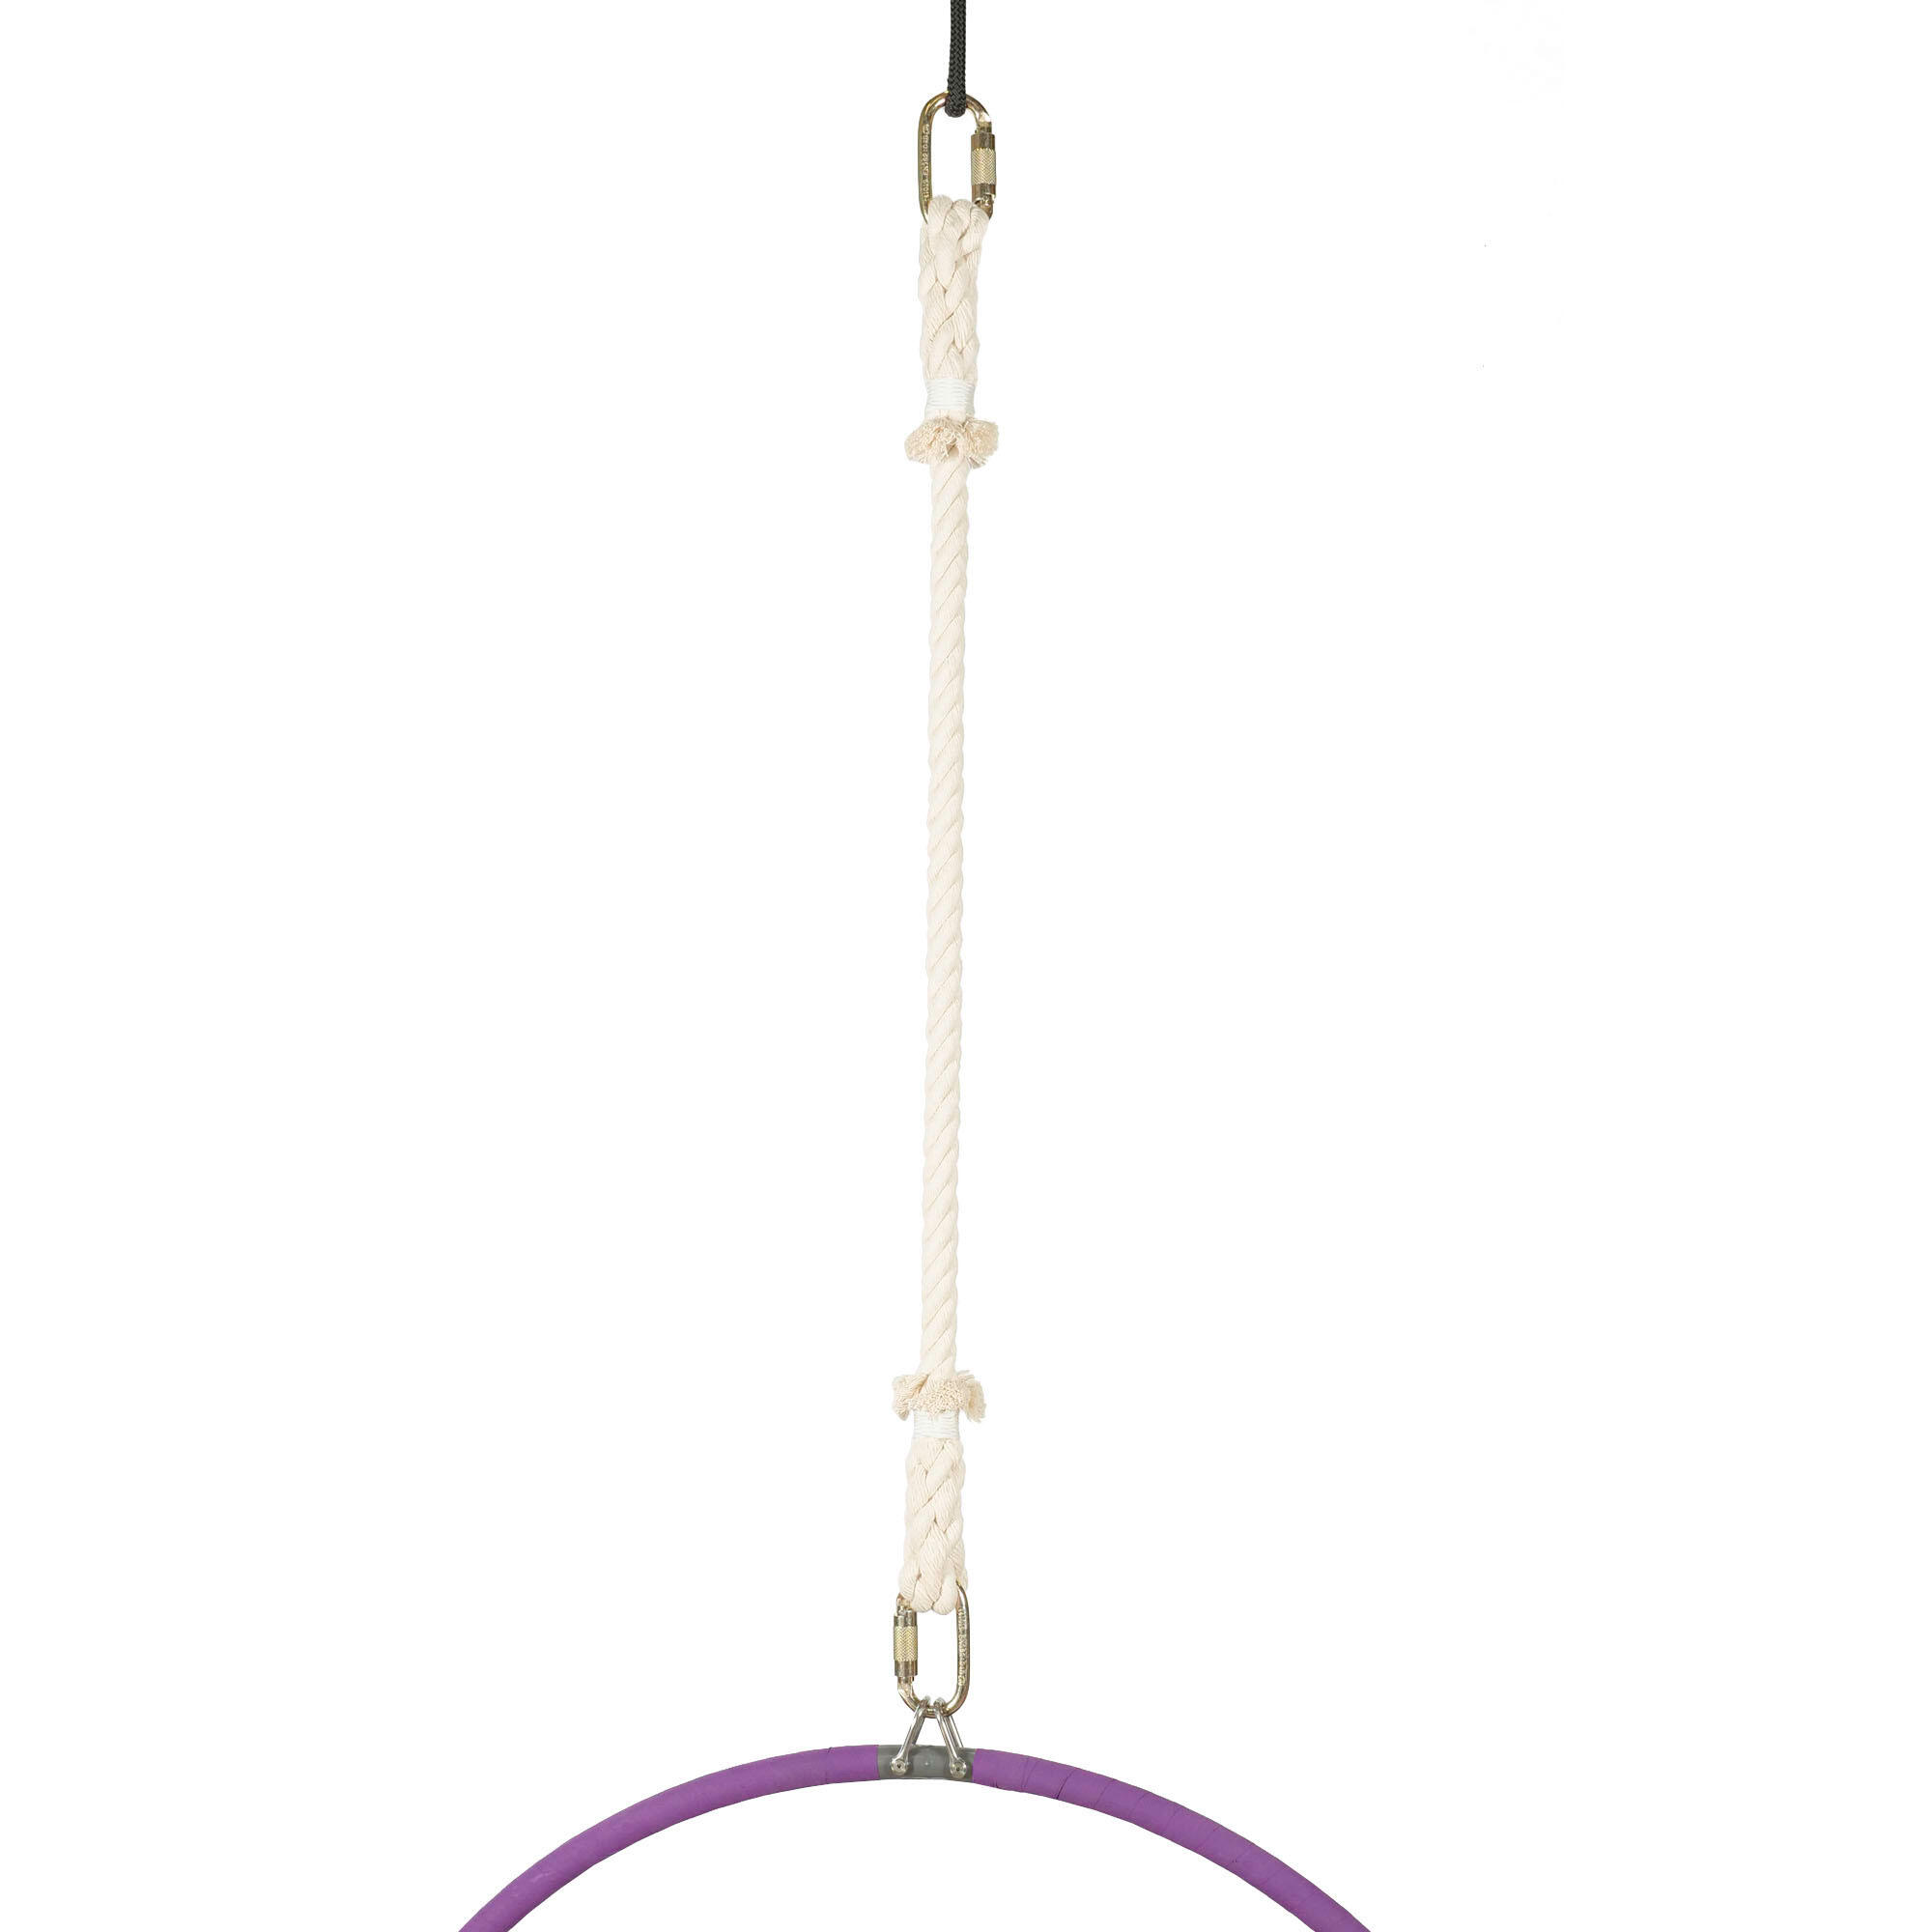 Prodigy Dyna-Core Hanging rope for Aerial Hoop-White 4/5